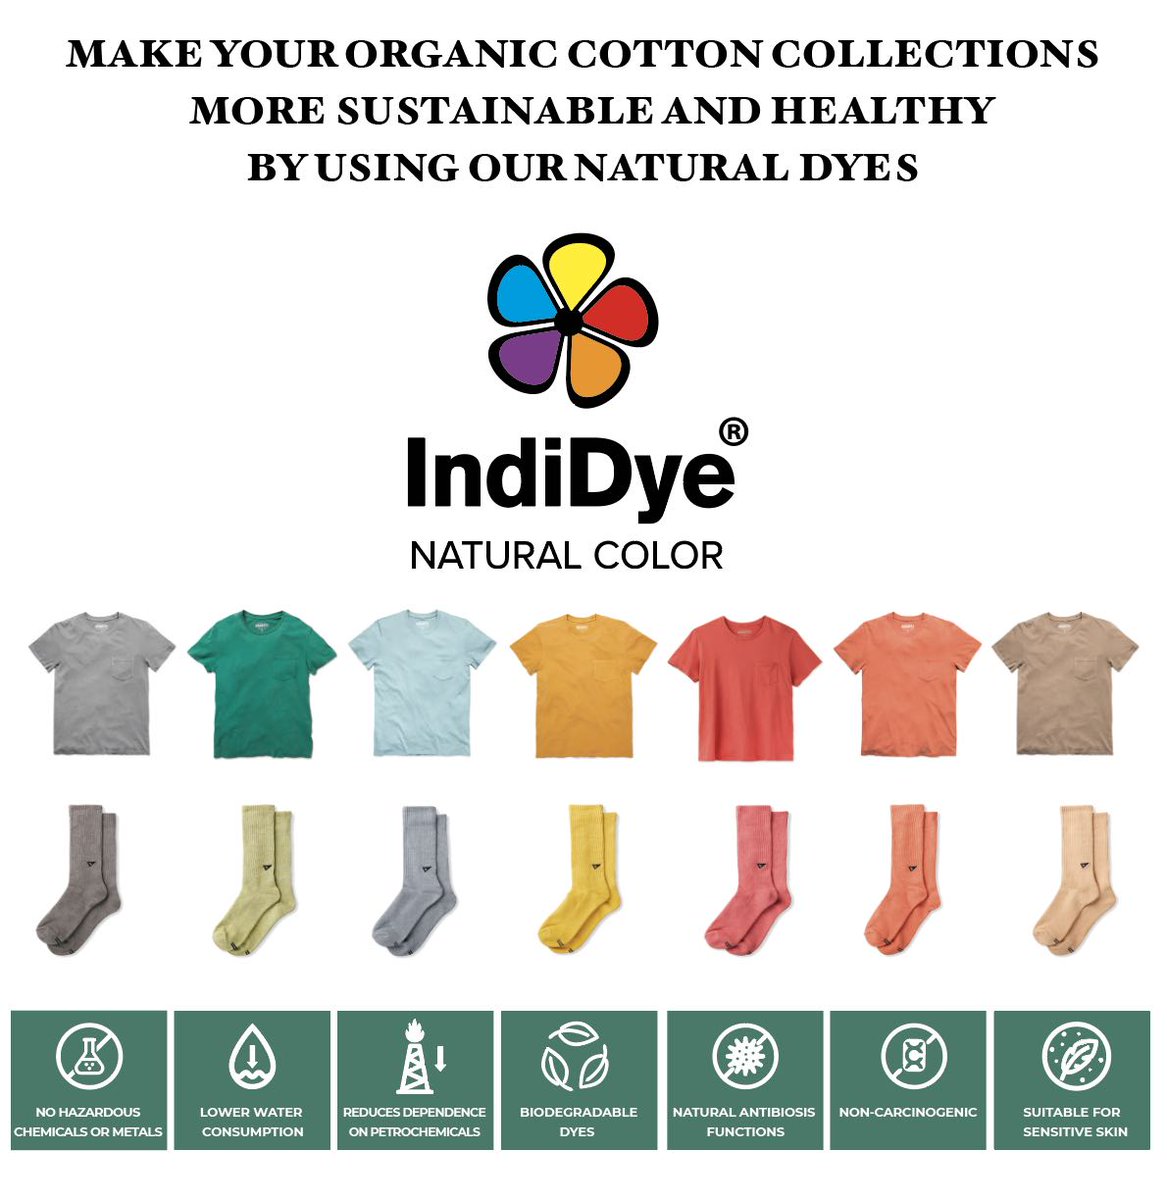 Plant dyes are natural, earth friendly, organic dyes.  IndiDye® achieve quality high level color fastness, without the use of hazardous chemicals, heavy metals, mordants or salts.
#naturalcolor #naturaldyes #naturaldyeing #naturaldye #sustainablecolors #ecocolor #ecodyes